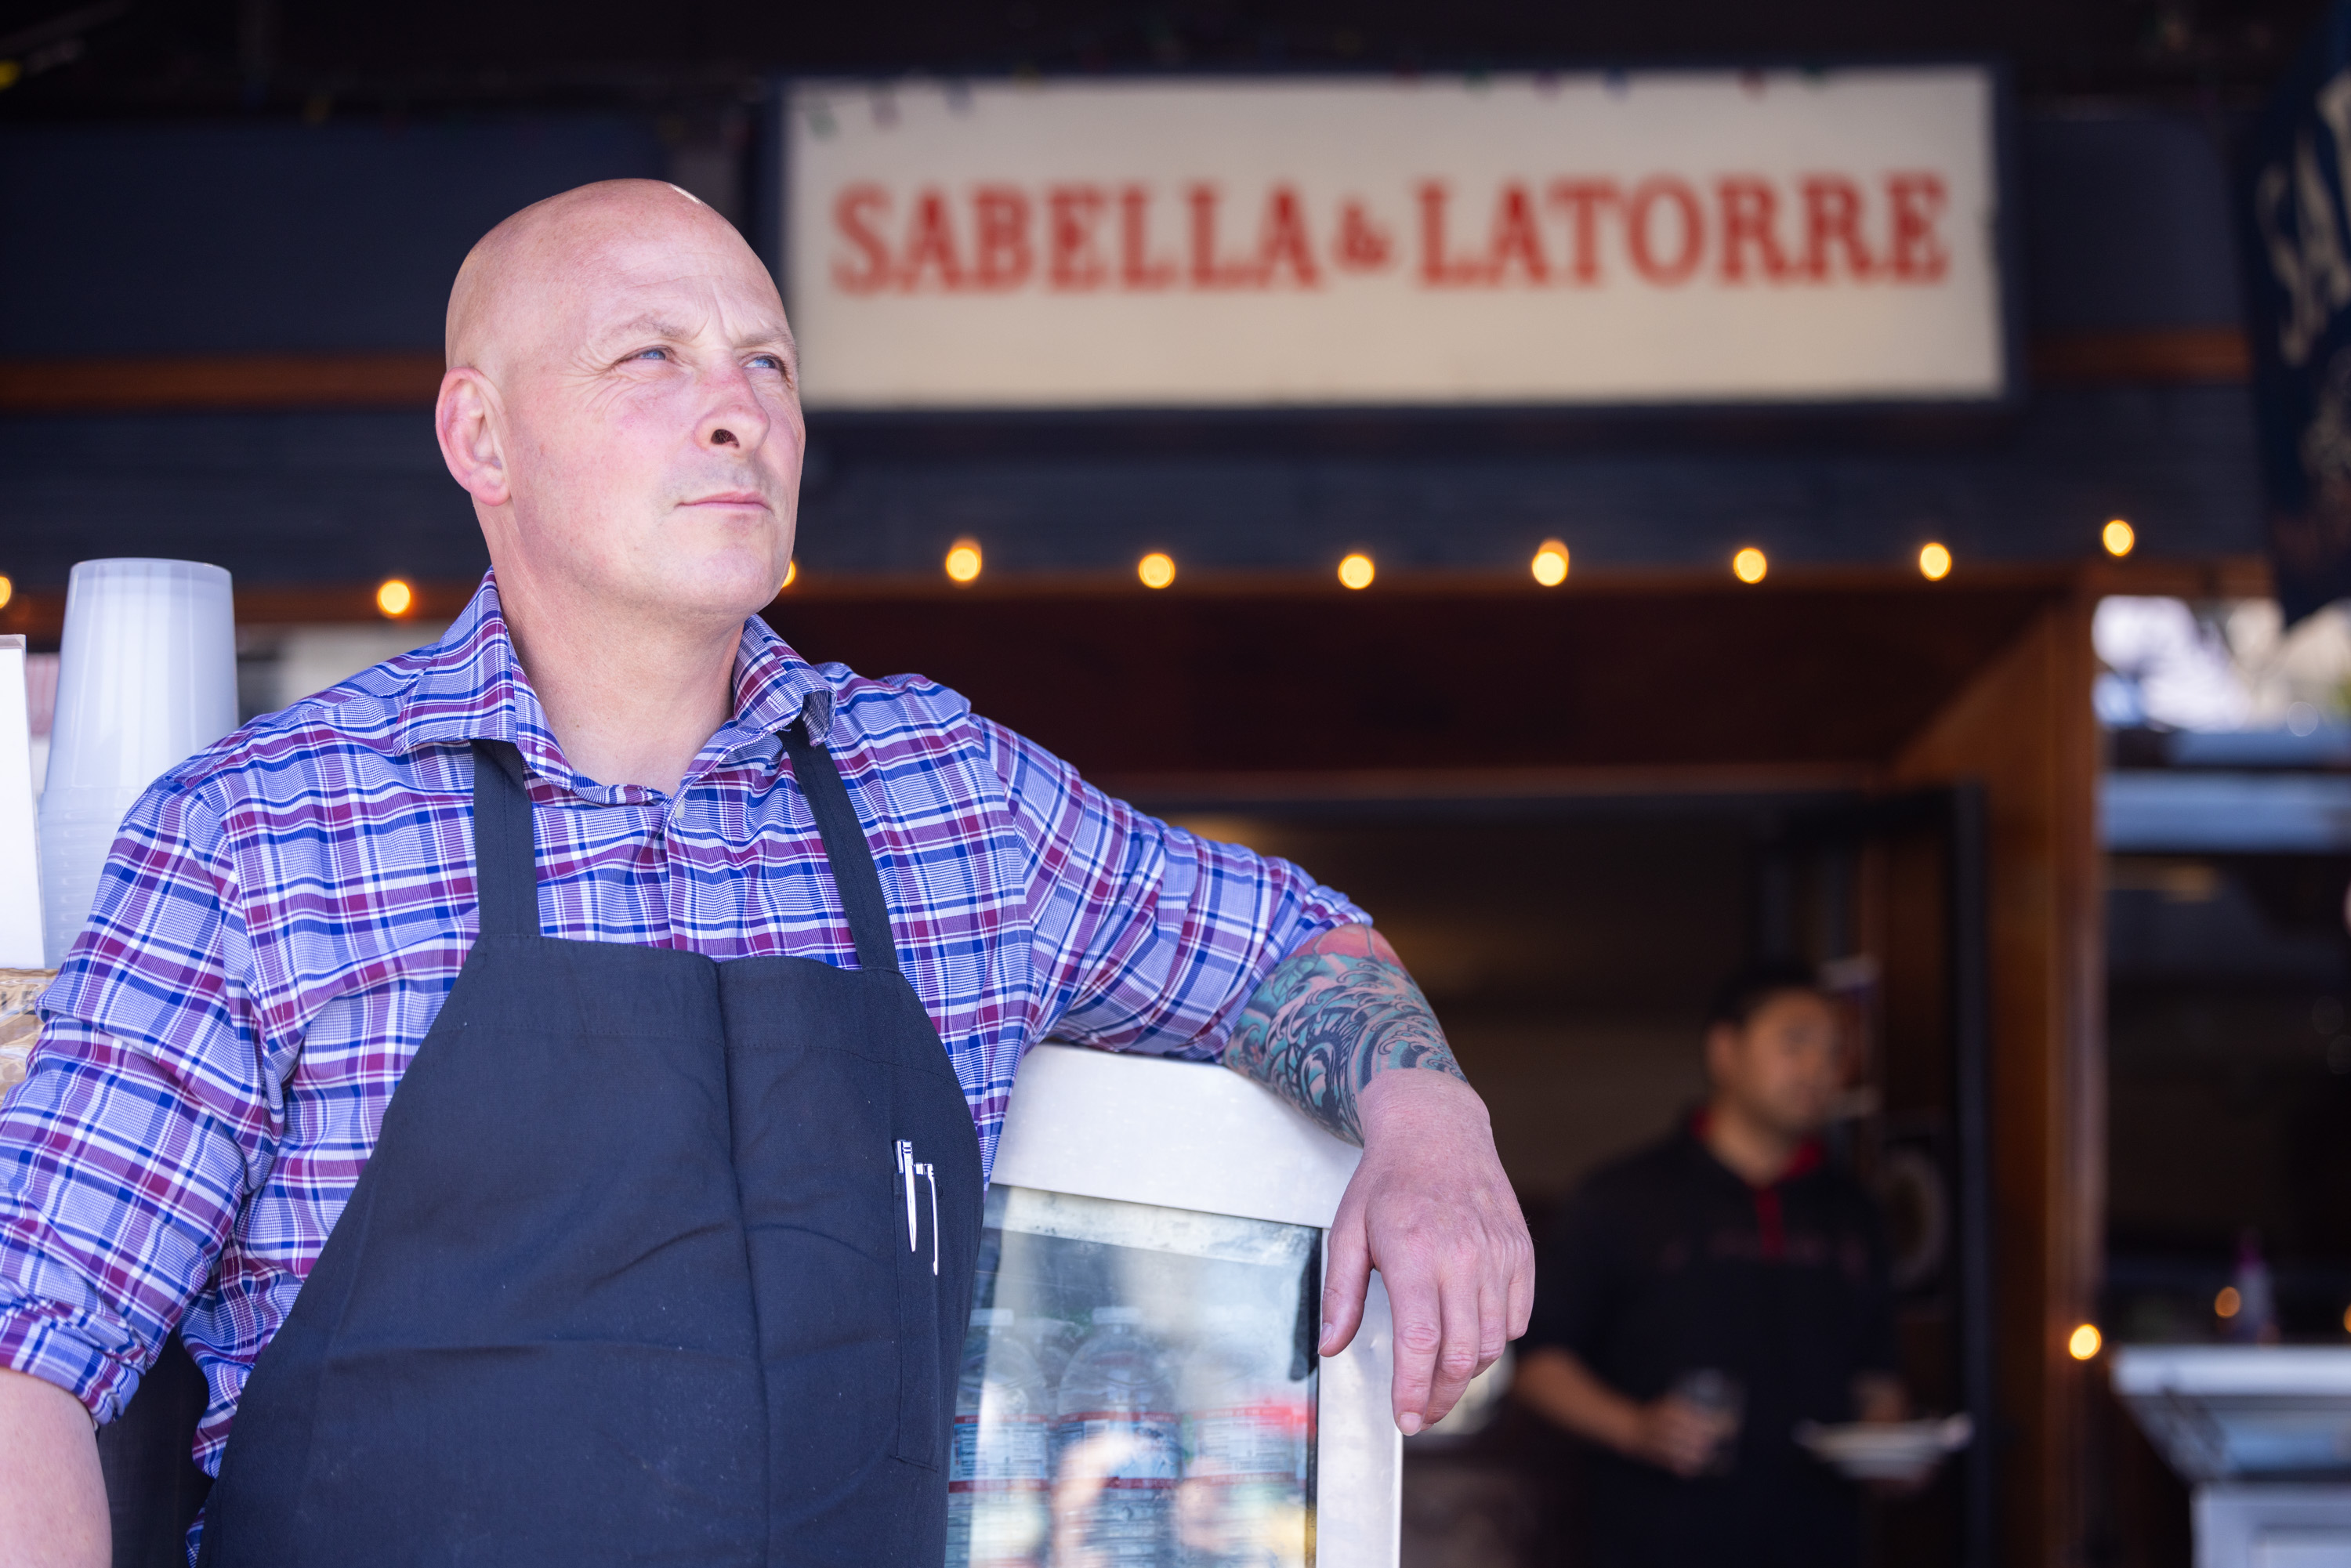 A bald man in a plaid shirt and black apron looks into the distance while leaning on a counter. Behind him, a &quot;SABELLA &amp; LATORRE&quot; sign is visible.